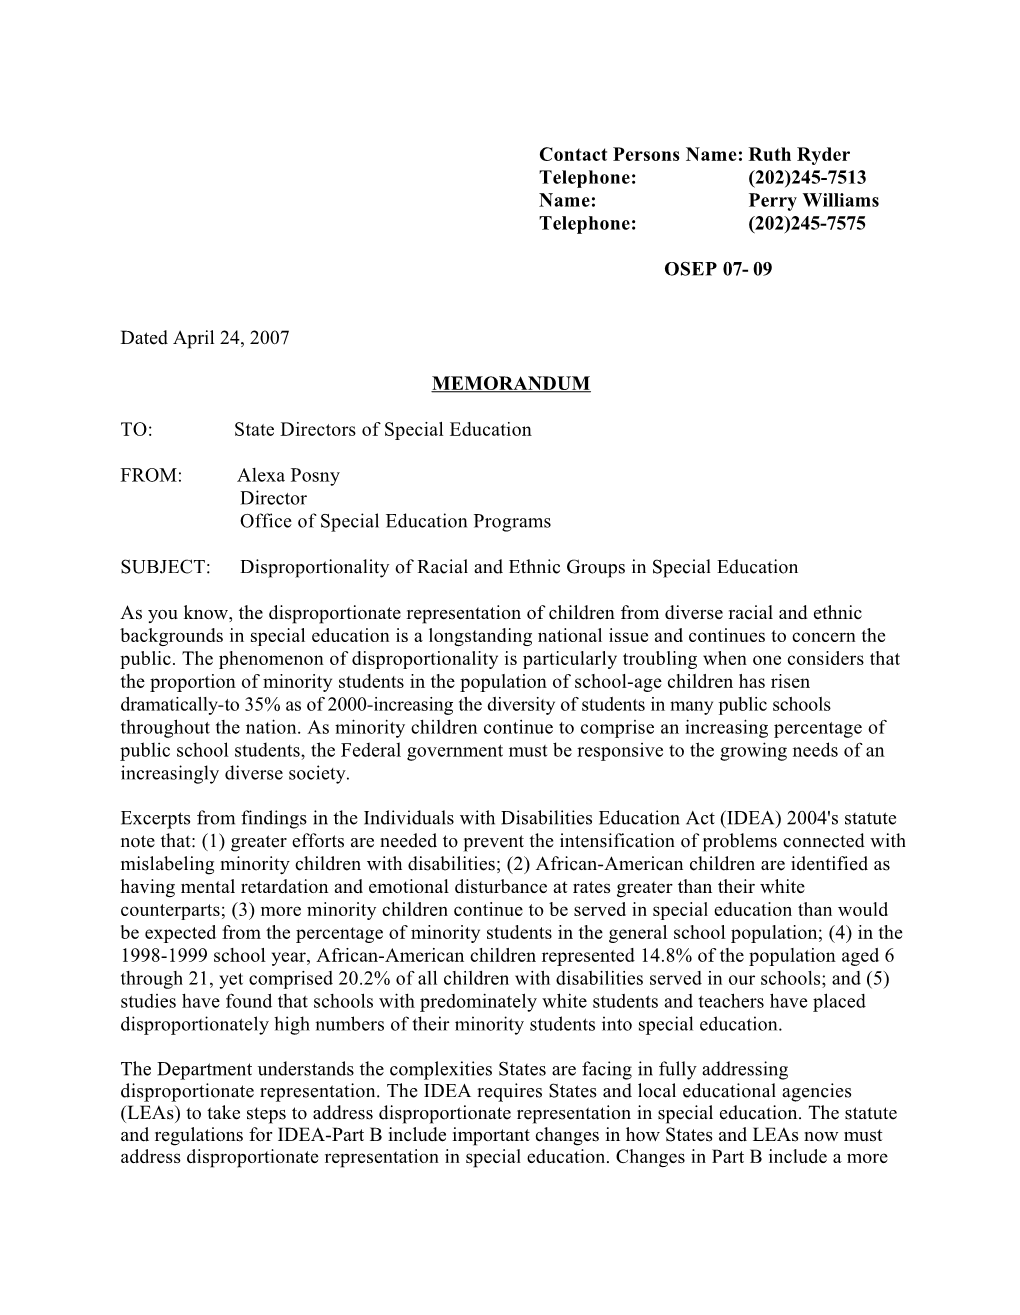 OSEP Memo Dated Letter Dated 04/24/07 Re: Interpreting IDEA Or the Regulations That Implement